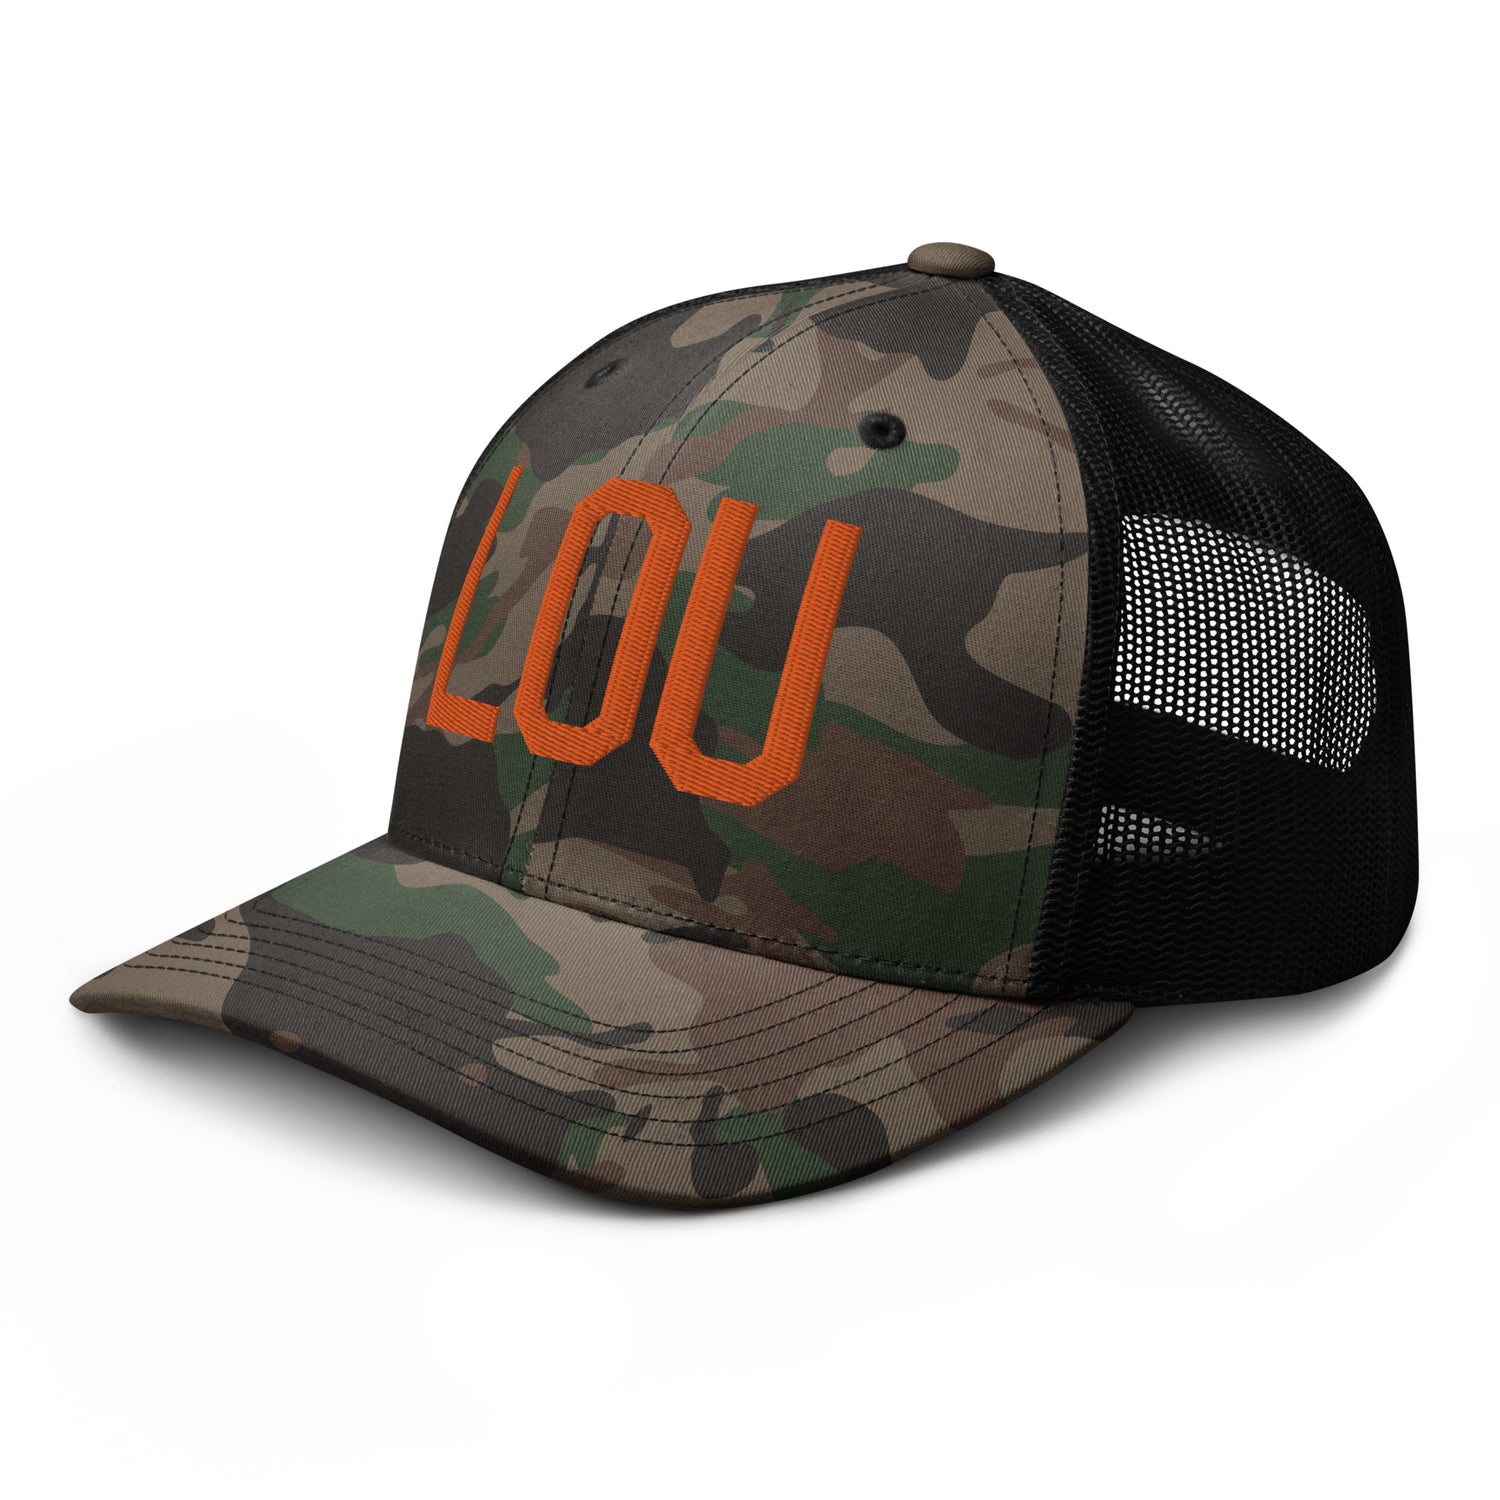 Louisville Kentucky Hats and Caps • LOU Airport Code